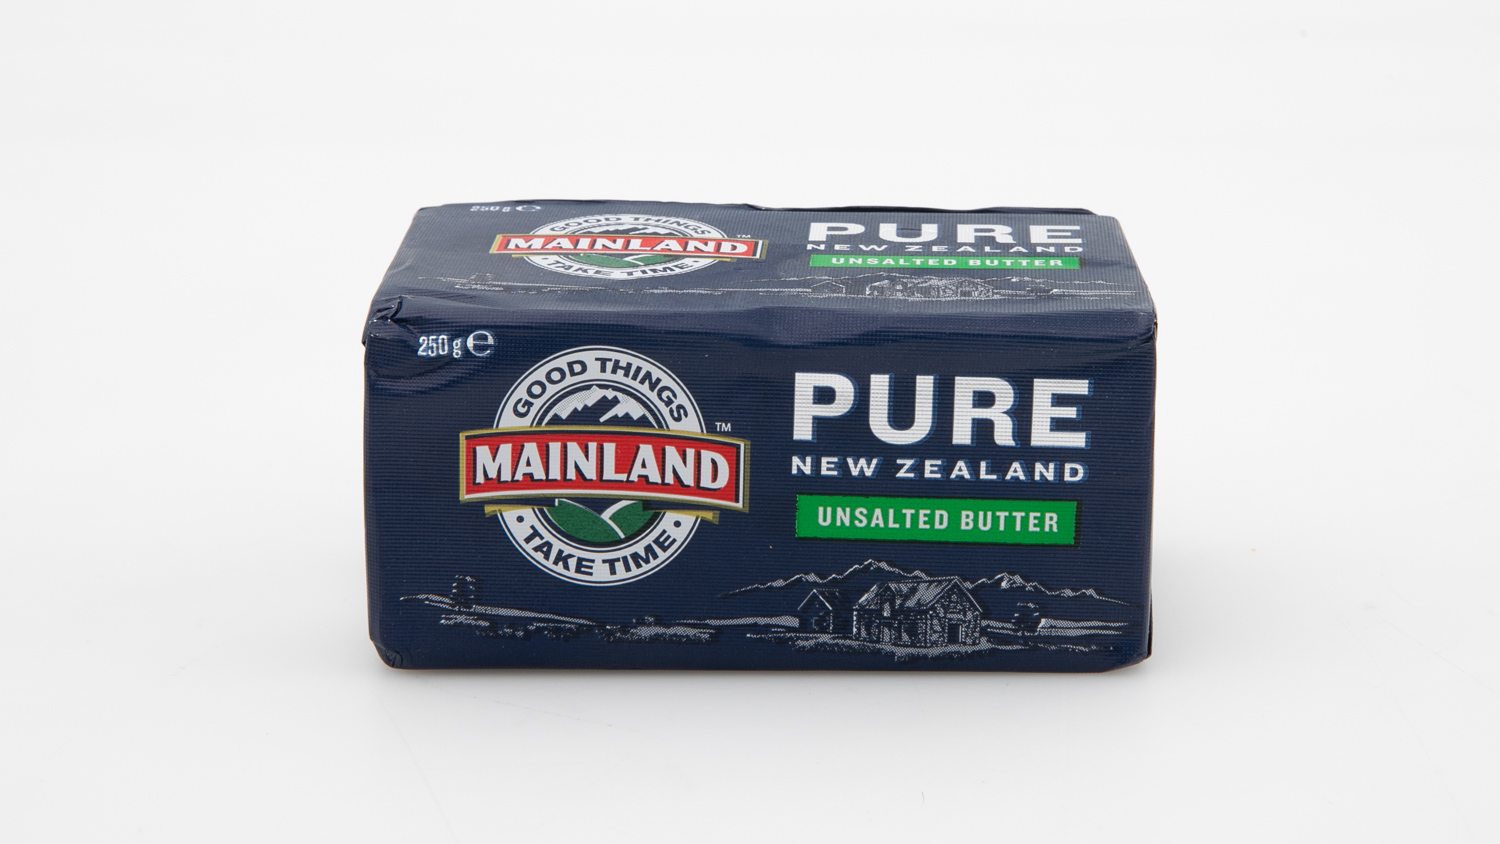 Mainland Pure New Zealand Unsalted Butter carousel image